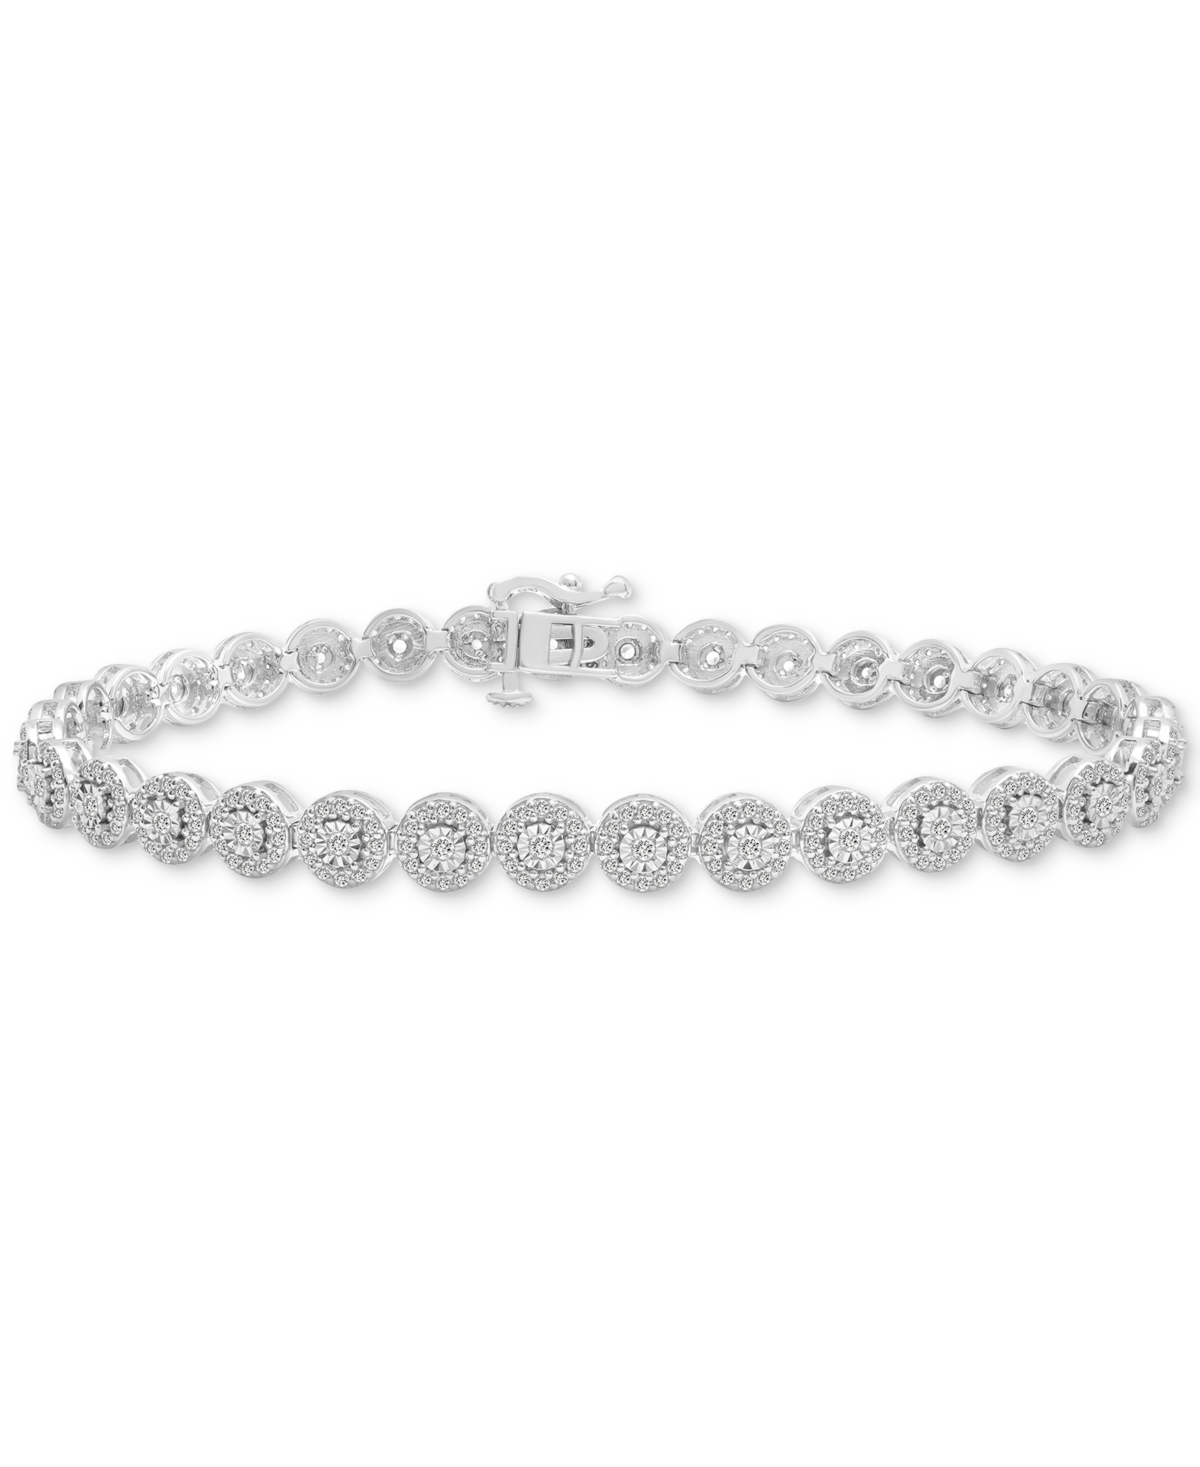 Wrapped In Love Diamond Tennis Bracelet (2 Ct. T.w.) In Sterling Silver, Created For Macy's